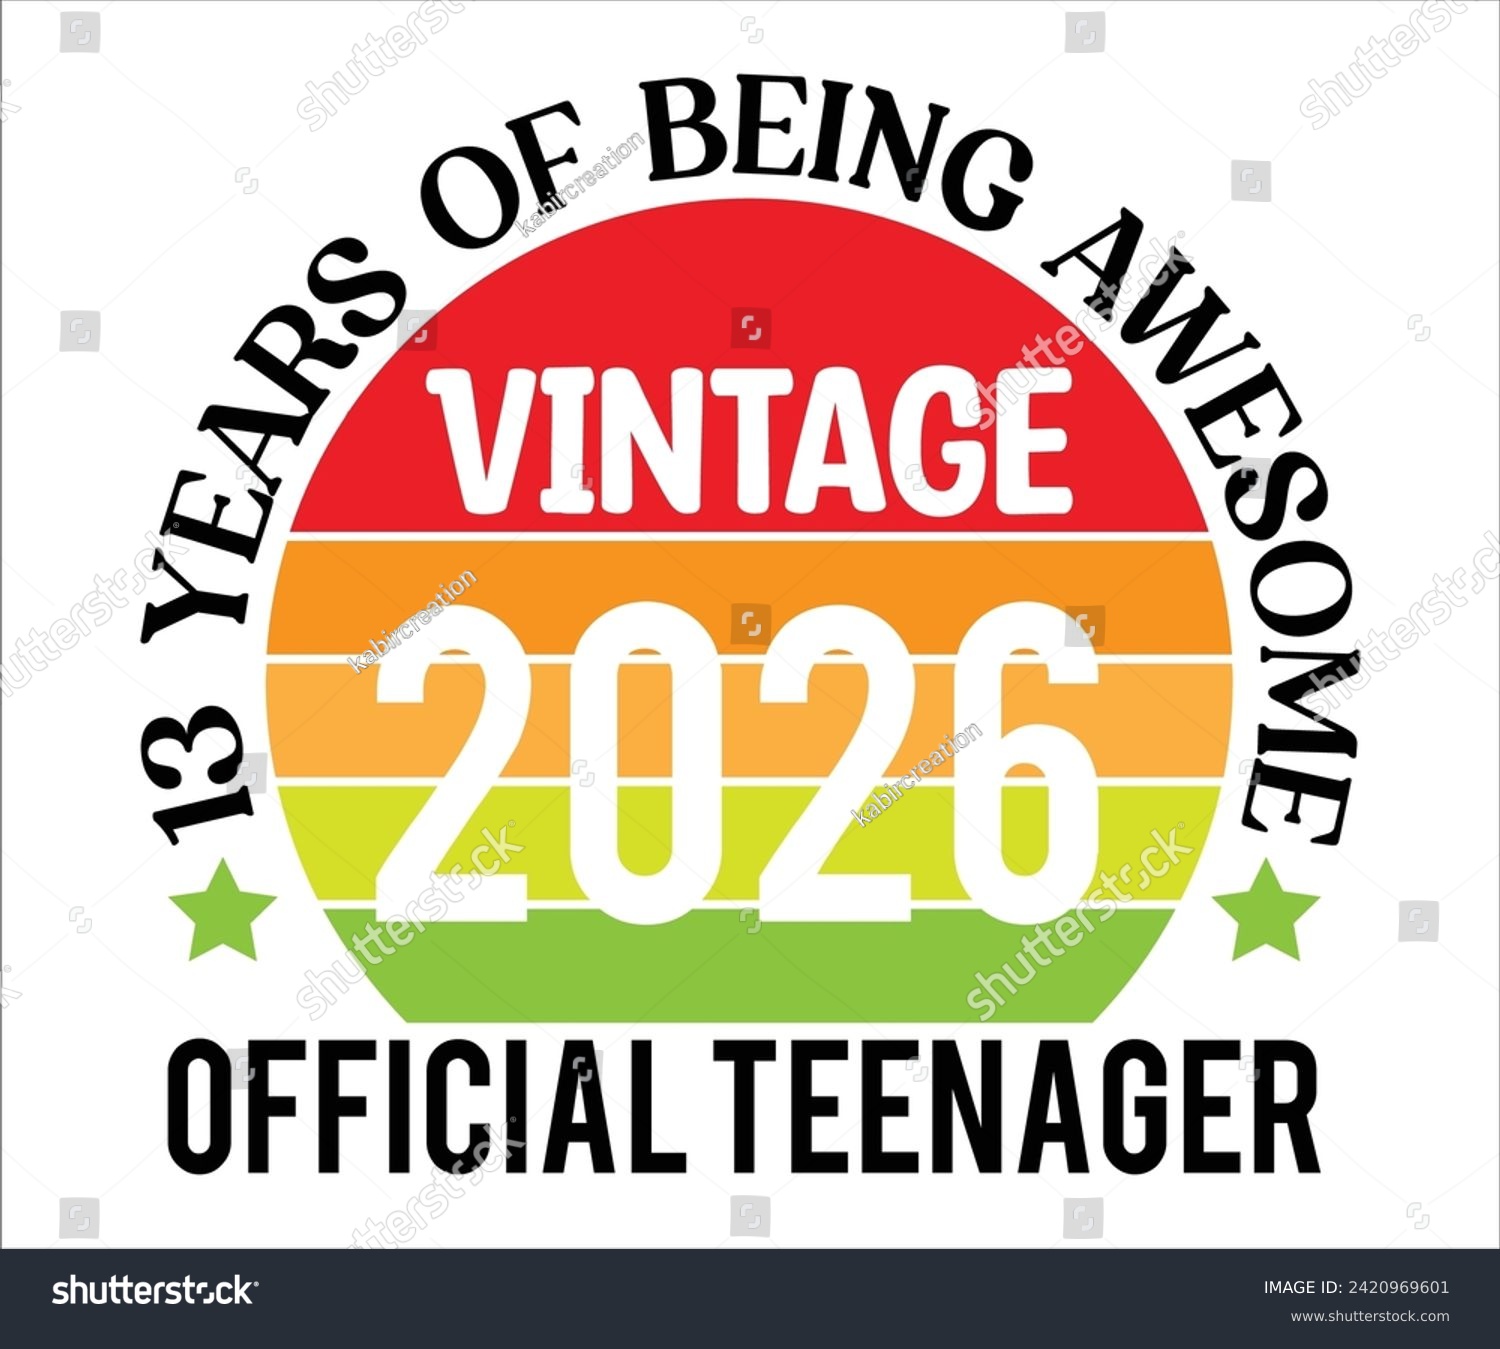 SVG of 13 Years Of Being Wesome 2026 Official Teenager T-shirt,100 Day School Svg,100 Day School T-shirt, welcome Back To, School Day, 100 Days Of School Shirt Boy, 100 Days Shirt svg